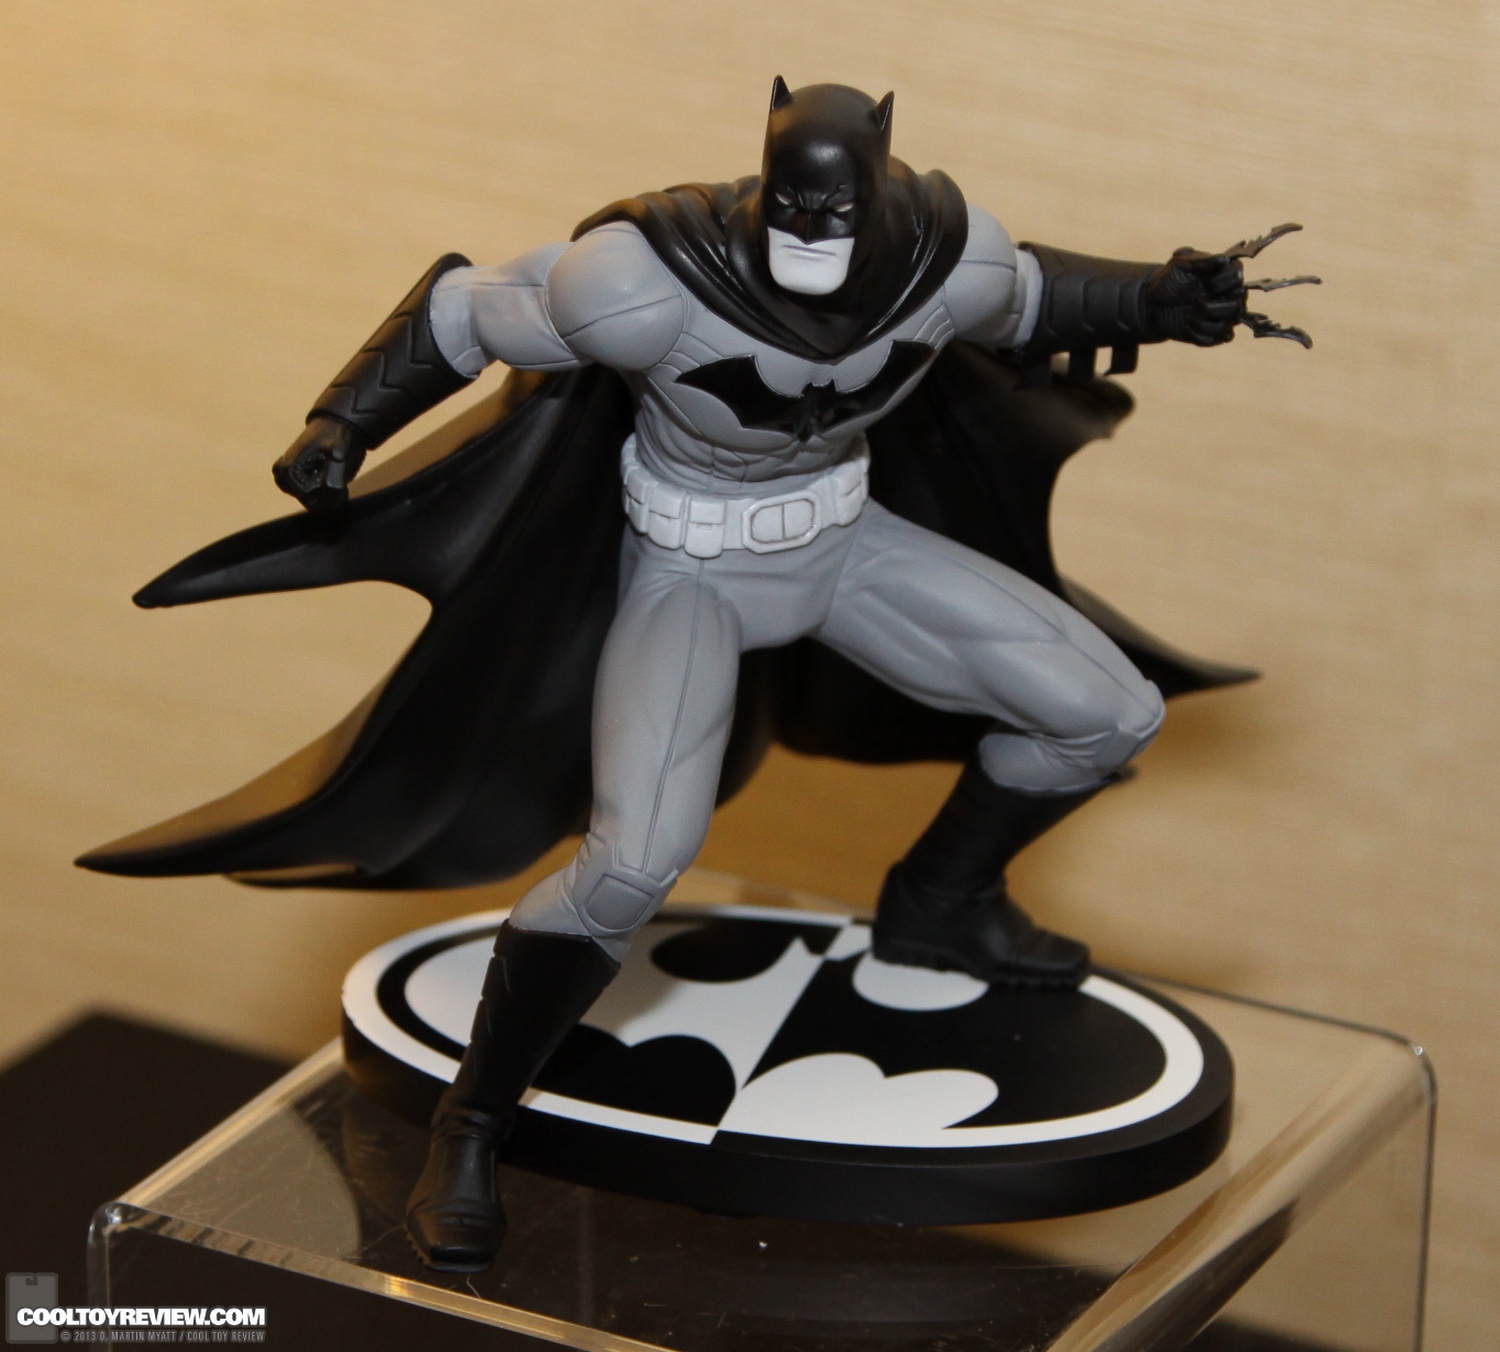 SDCC_2013_DC_Collectibles_Wed-007.jpg